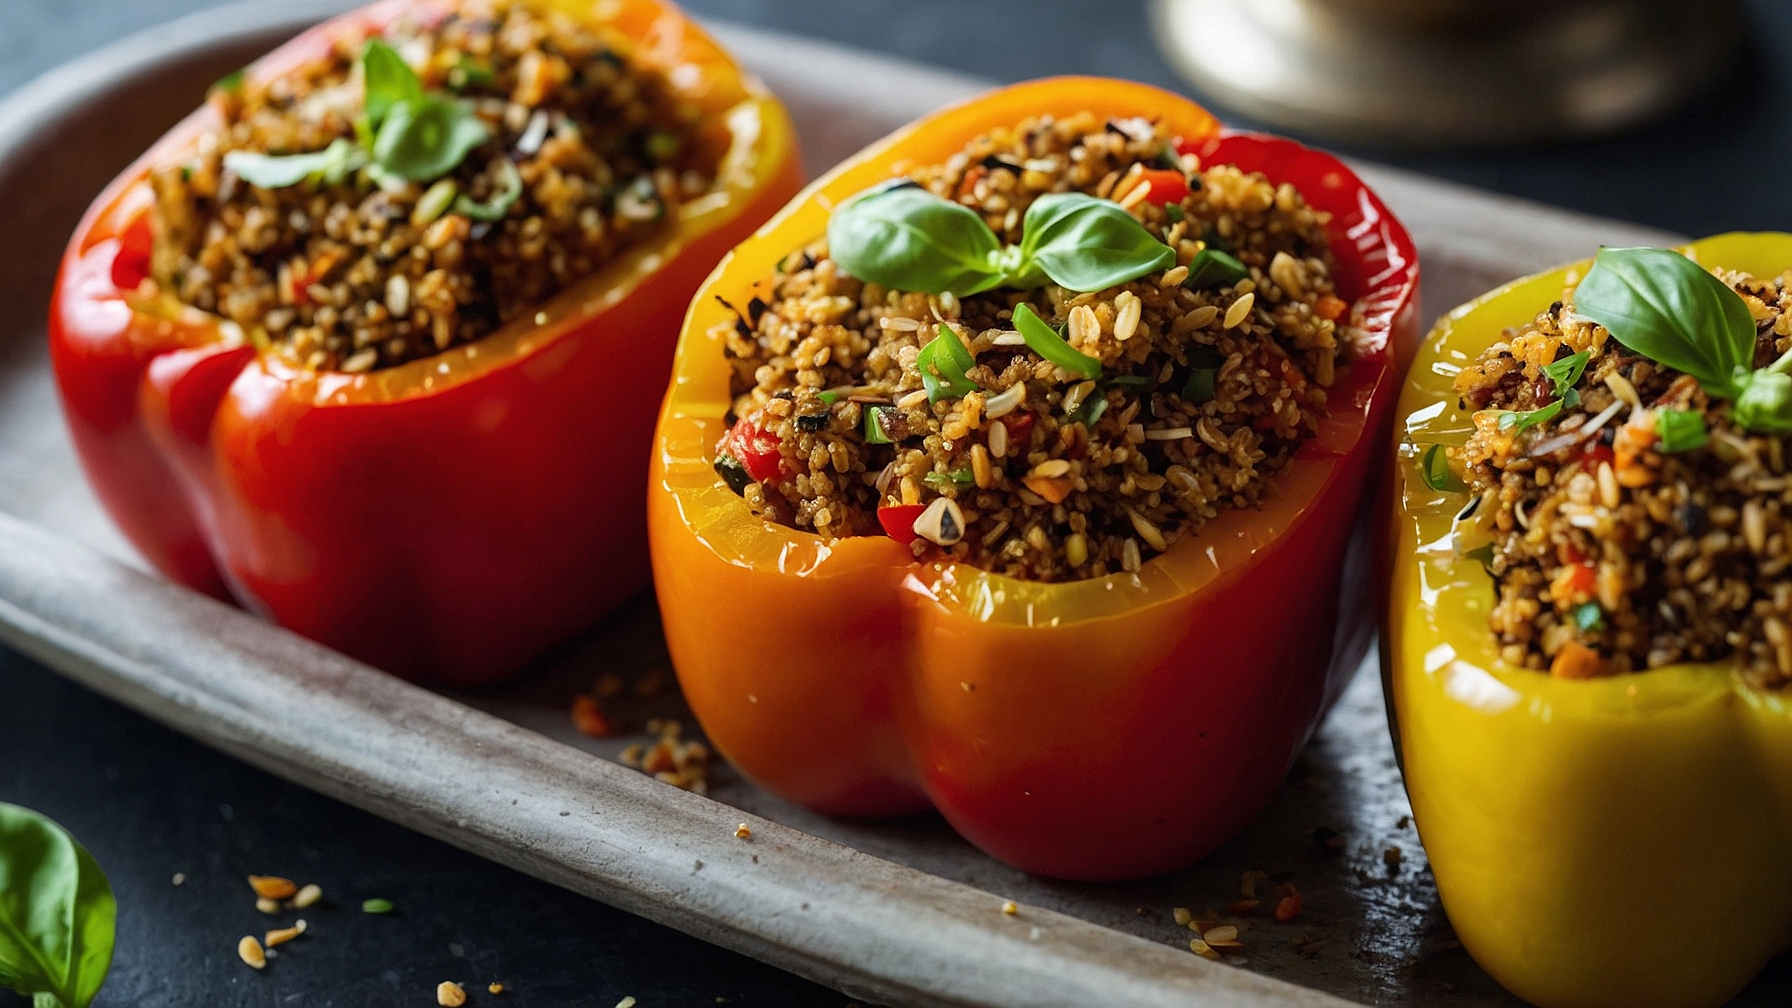 Quinoa-stuffed bell peppers with flaxseed crunch with red, orange, yellow peppers